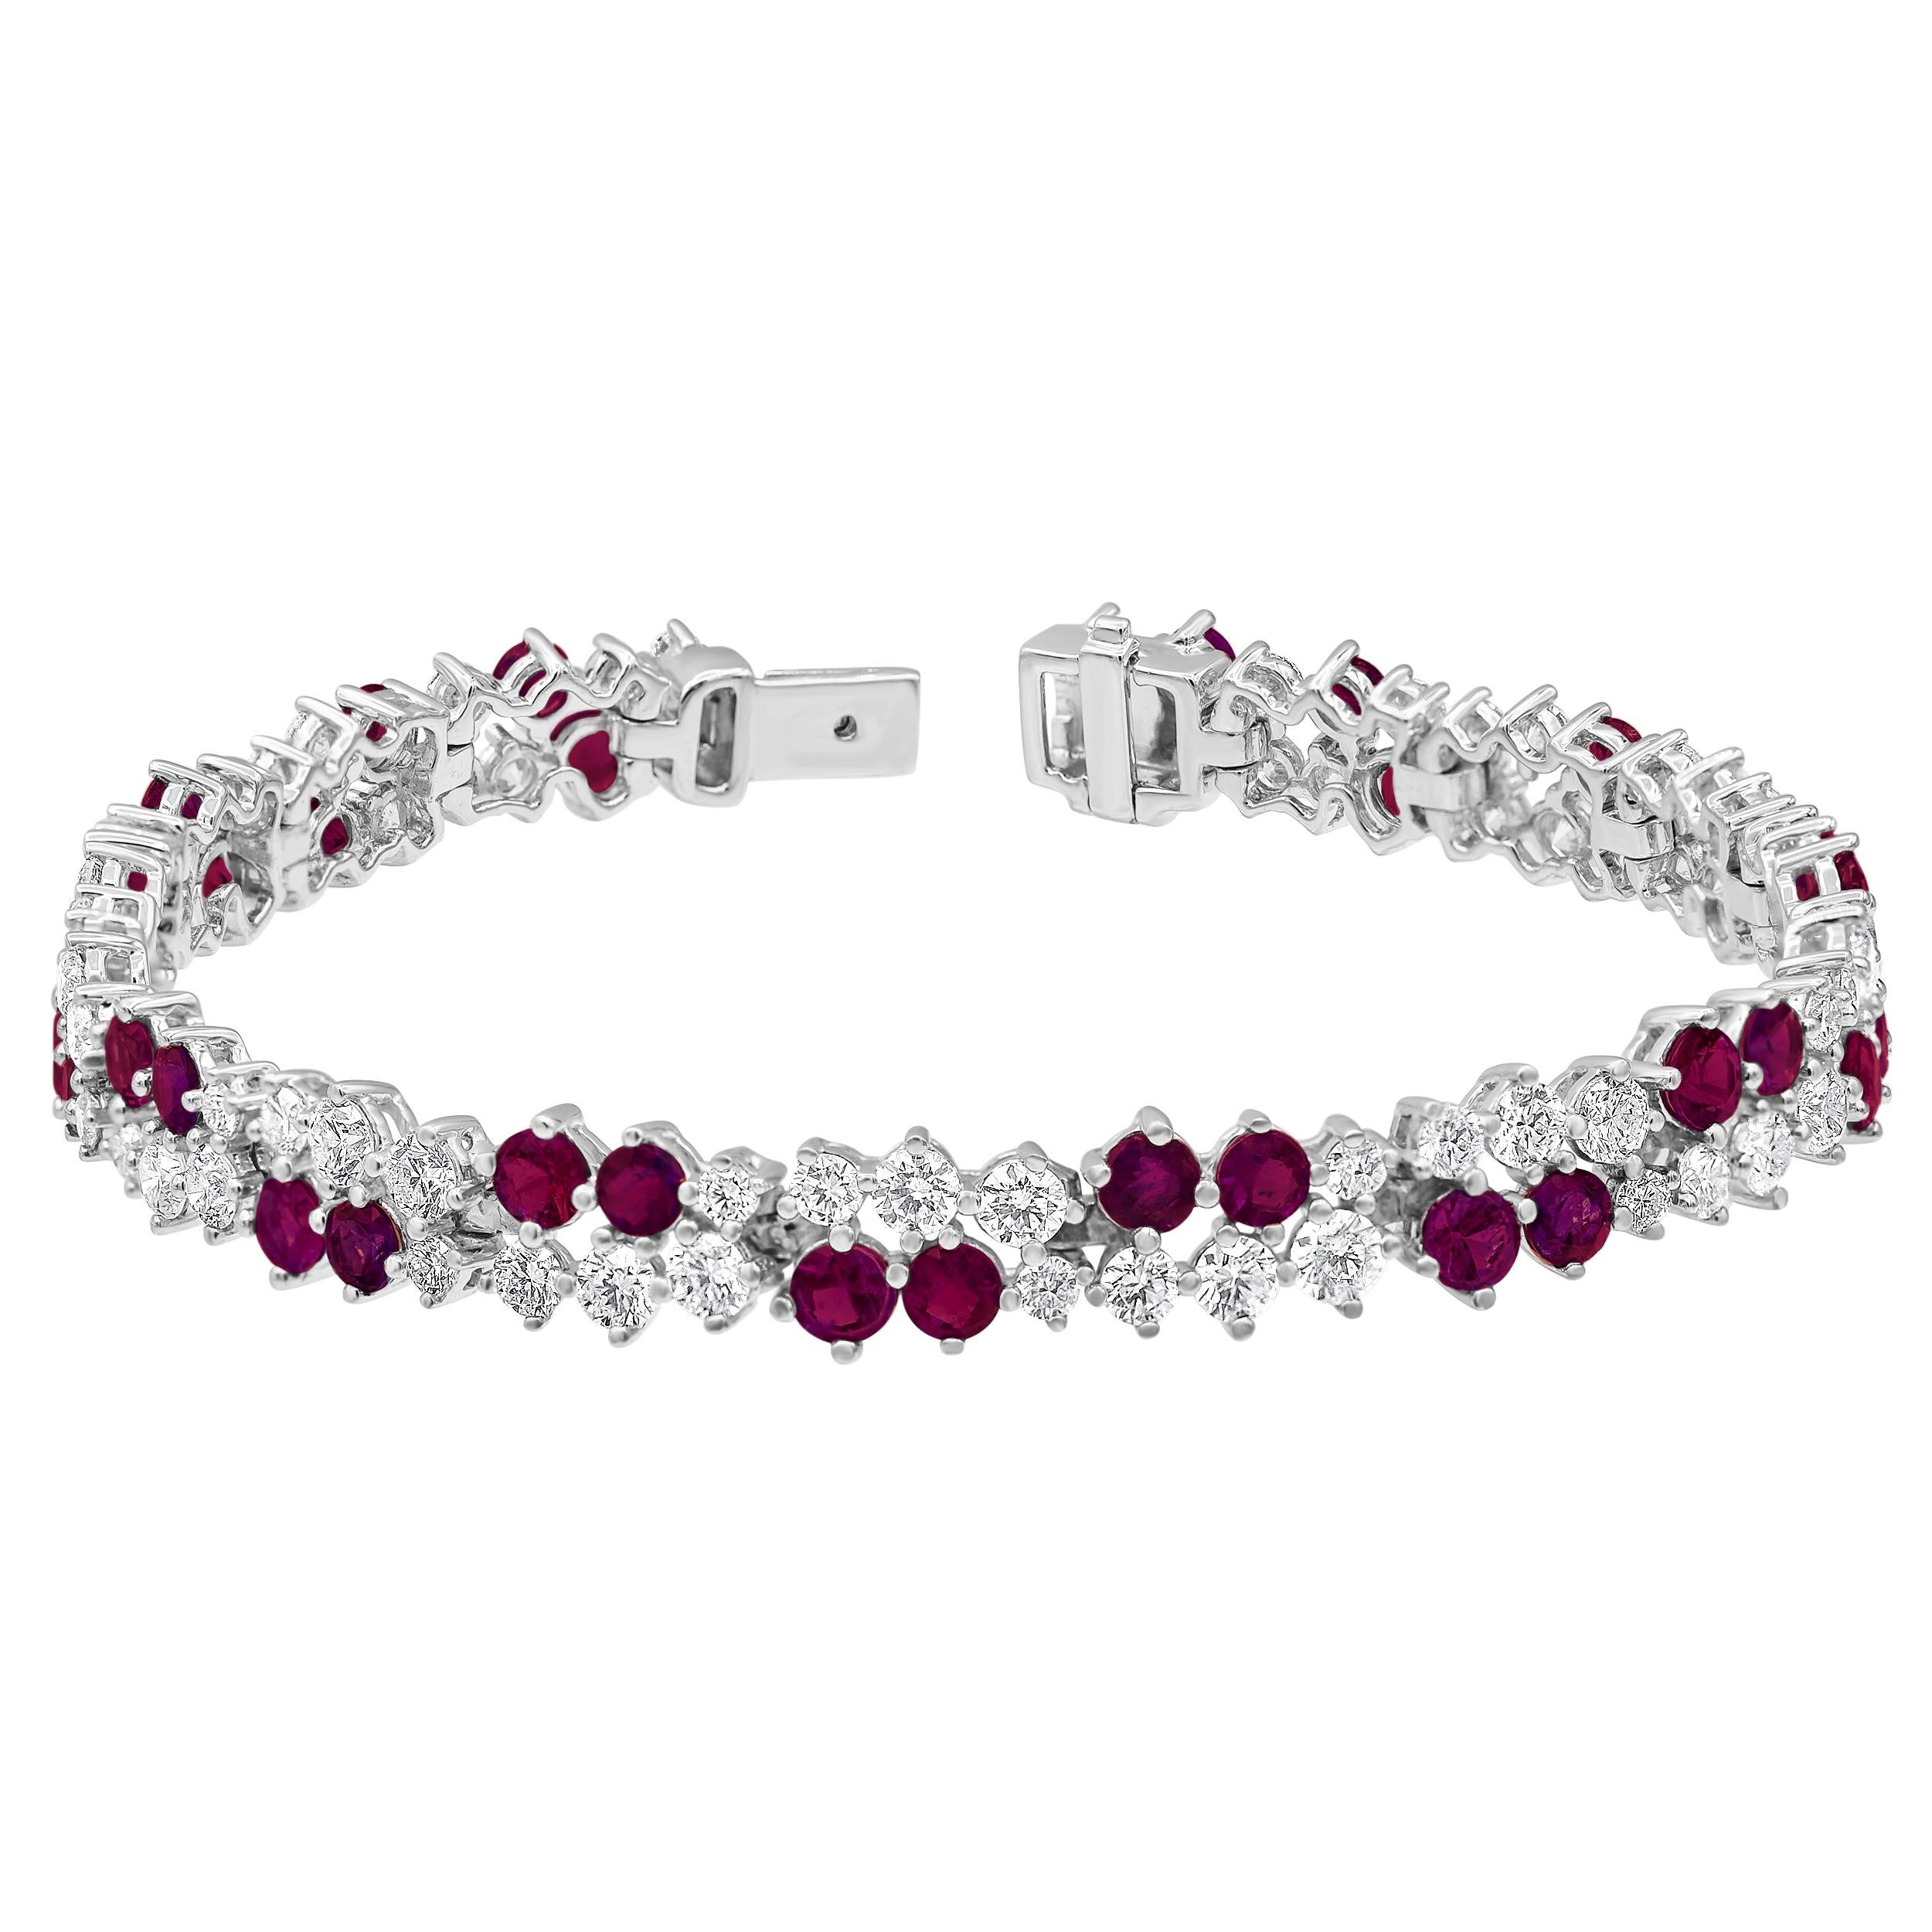 Regal splendor radiates from every angle of this 18k white gold bracelet as strings of round 5.00ct diamond with HI-I1
quality surrounded by delicate two rubies each set with 4 pairs of diamonds, linking each other in two-line making a breathtaking